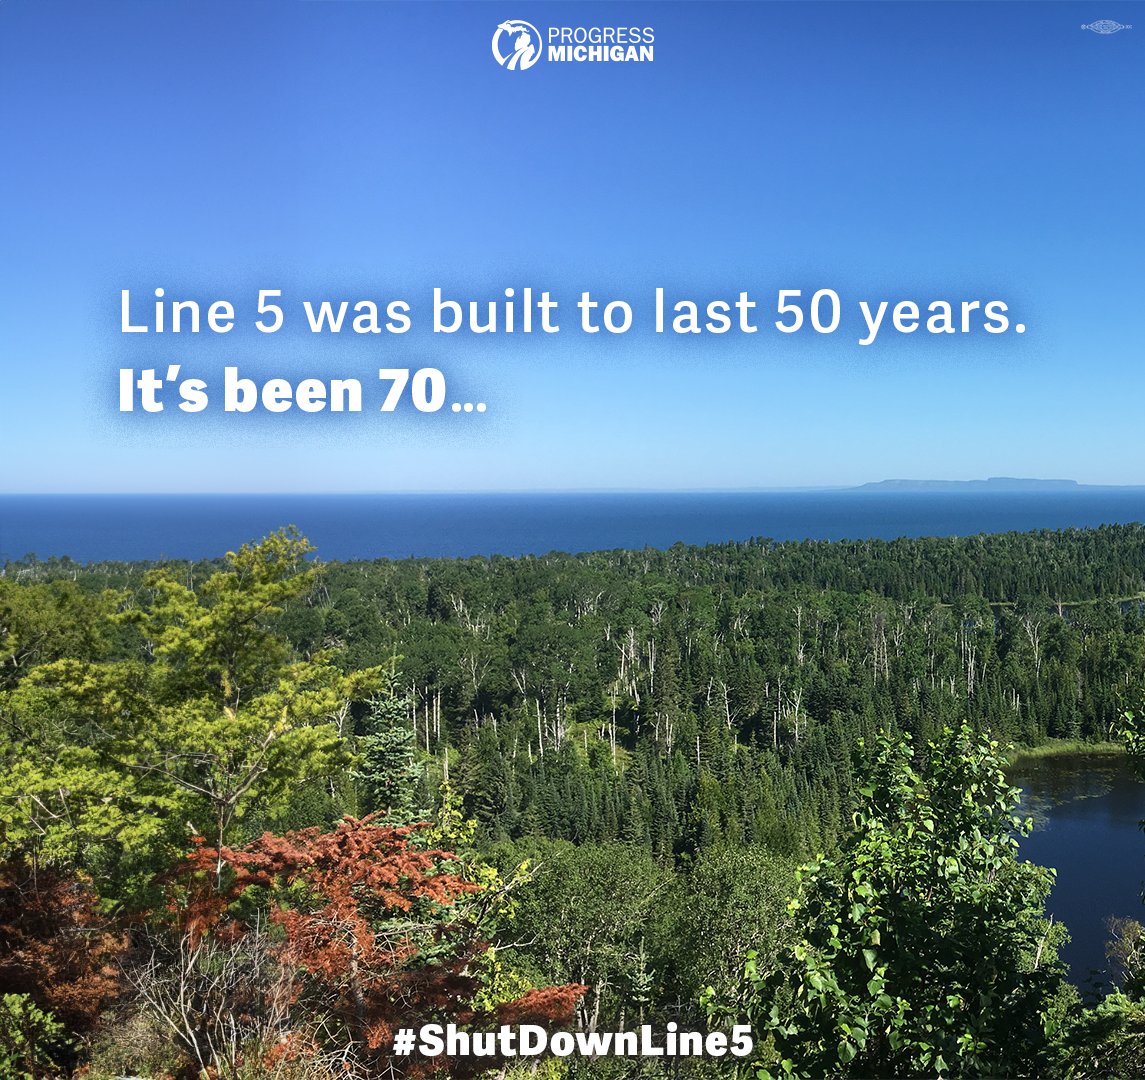 Our Great Lakes are what makes Michigan, Michigan! In order to protect our families and our environment, we need to #ShutDownLine5.